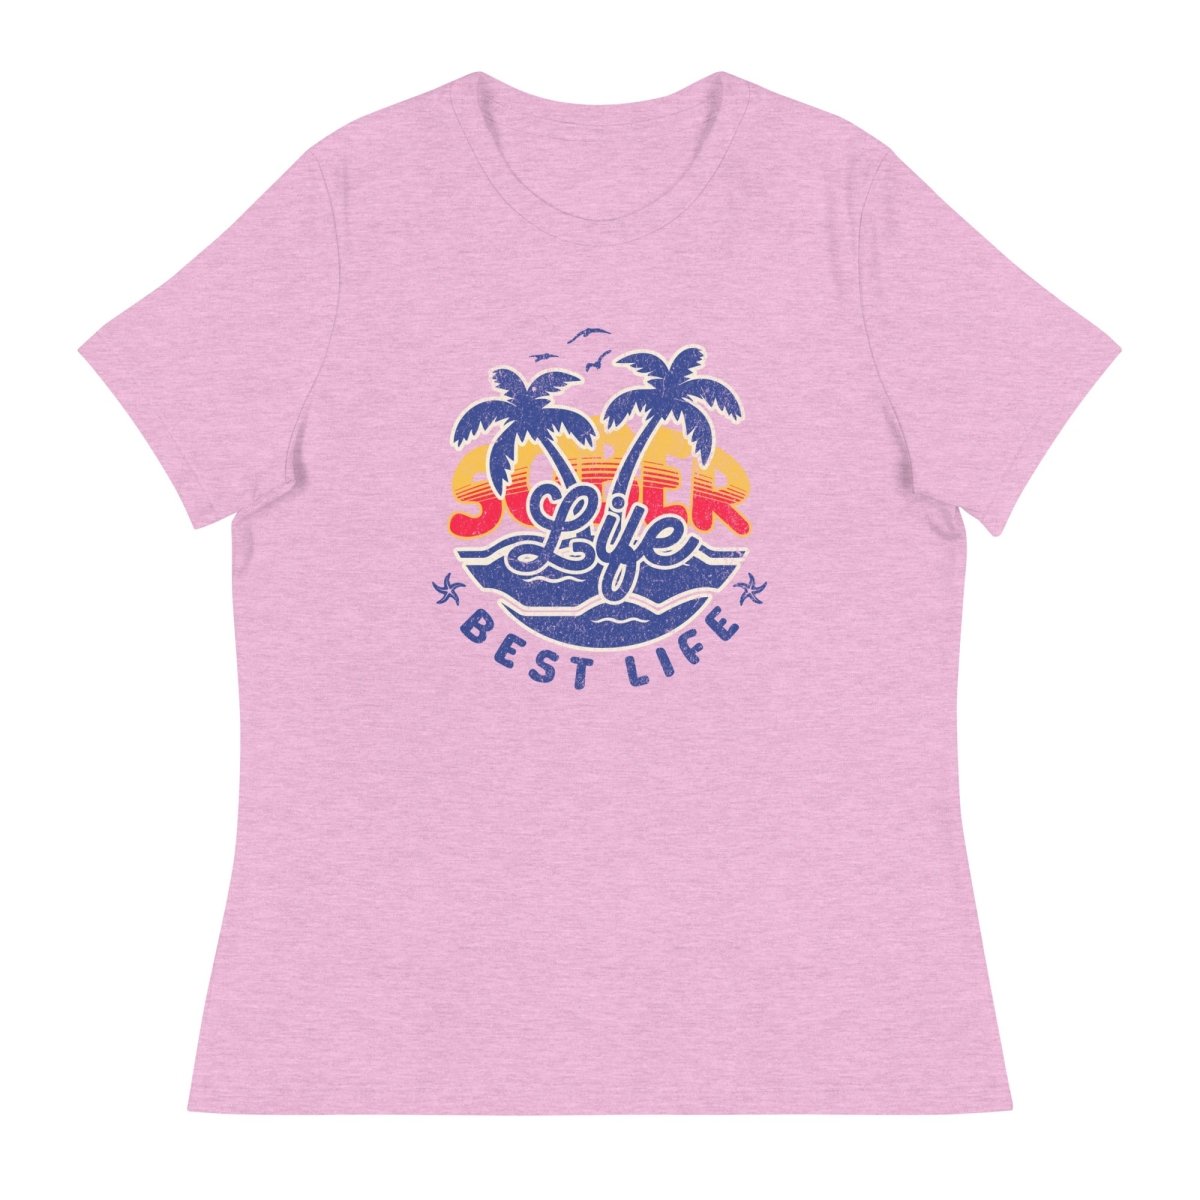 "Sober Life Best Life" Women's Relaxed Tee - Heather Prism Lilac / S | Sobervation